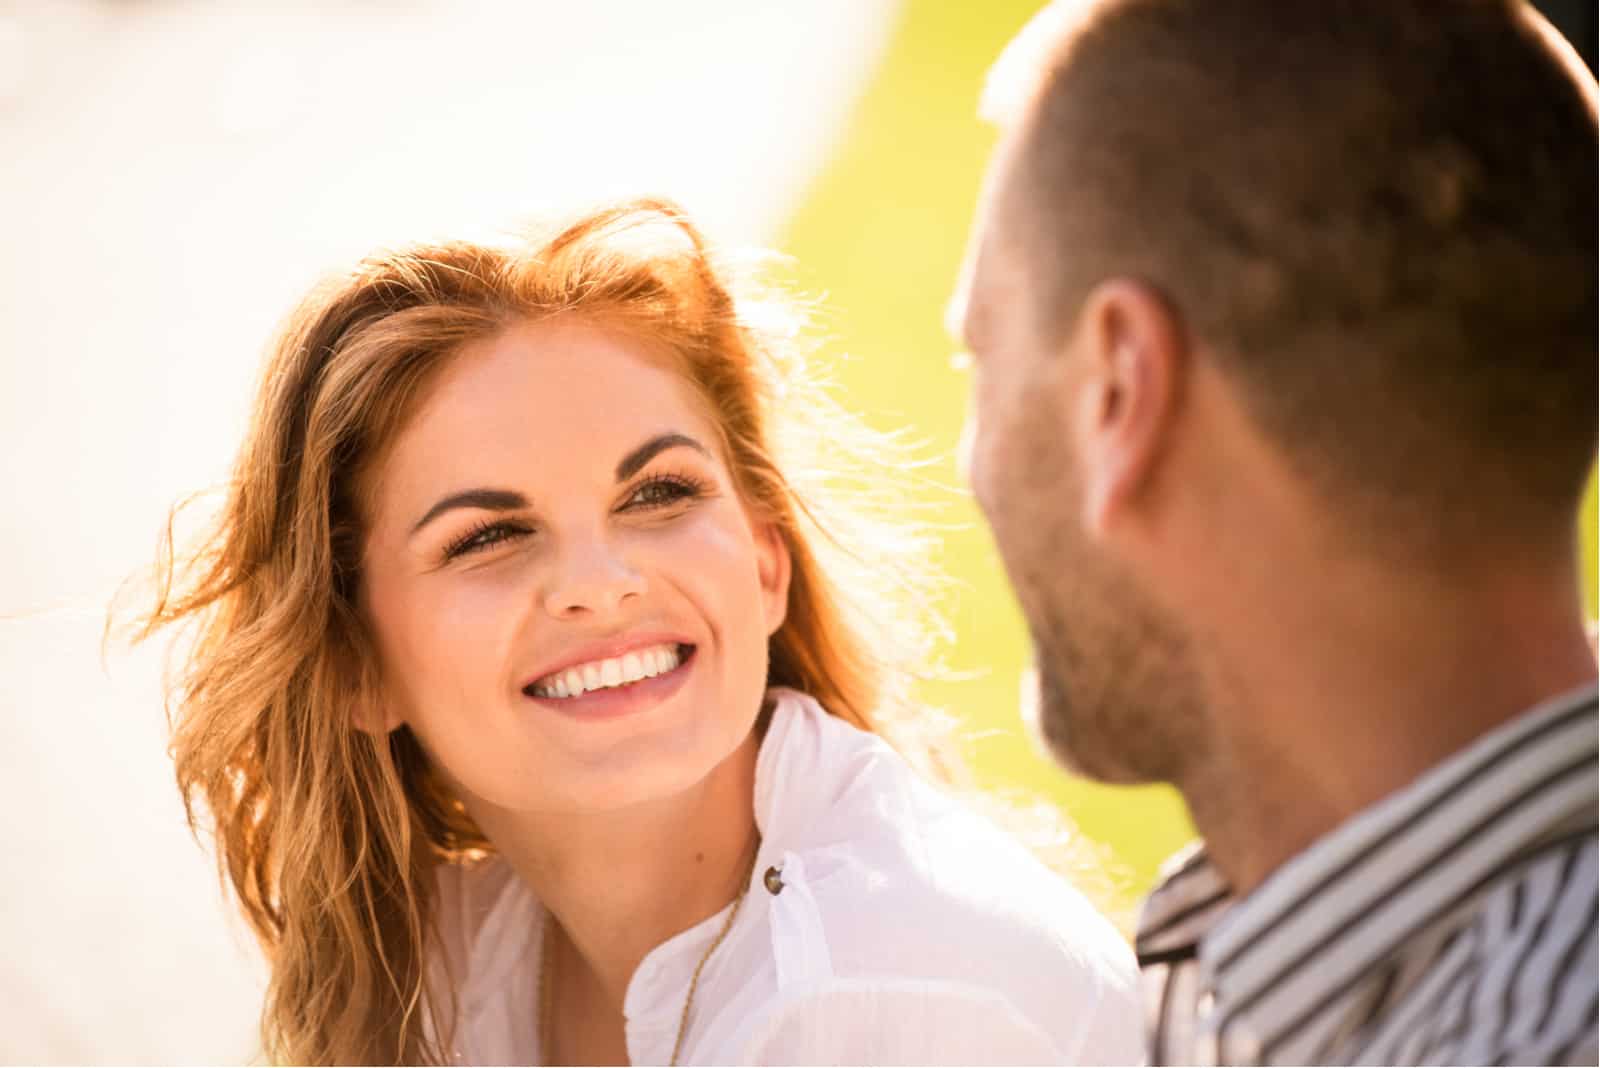 a smiling woman talking to a man